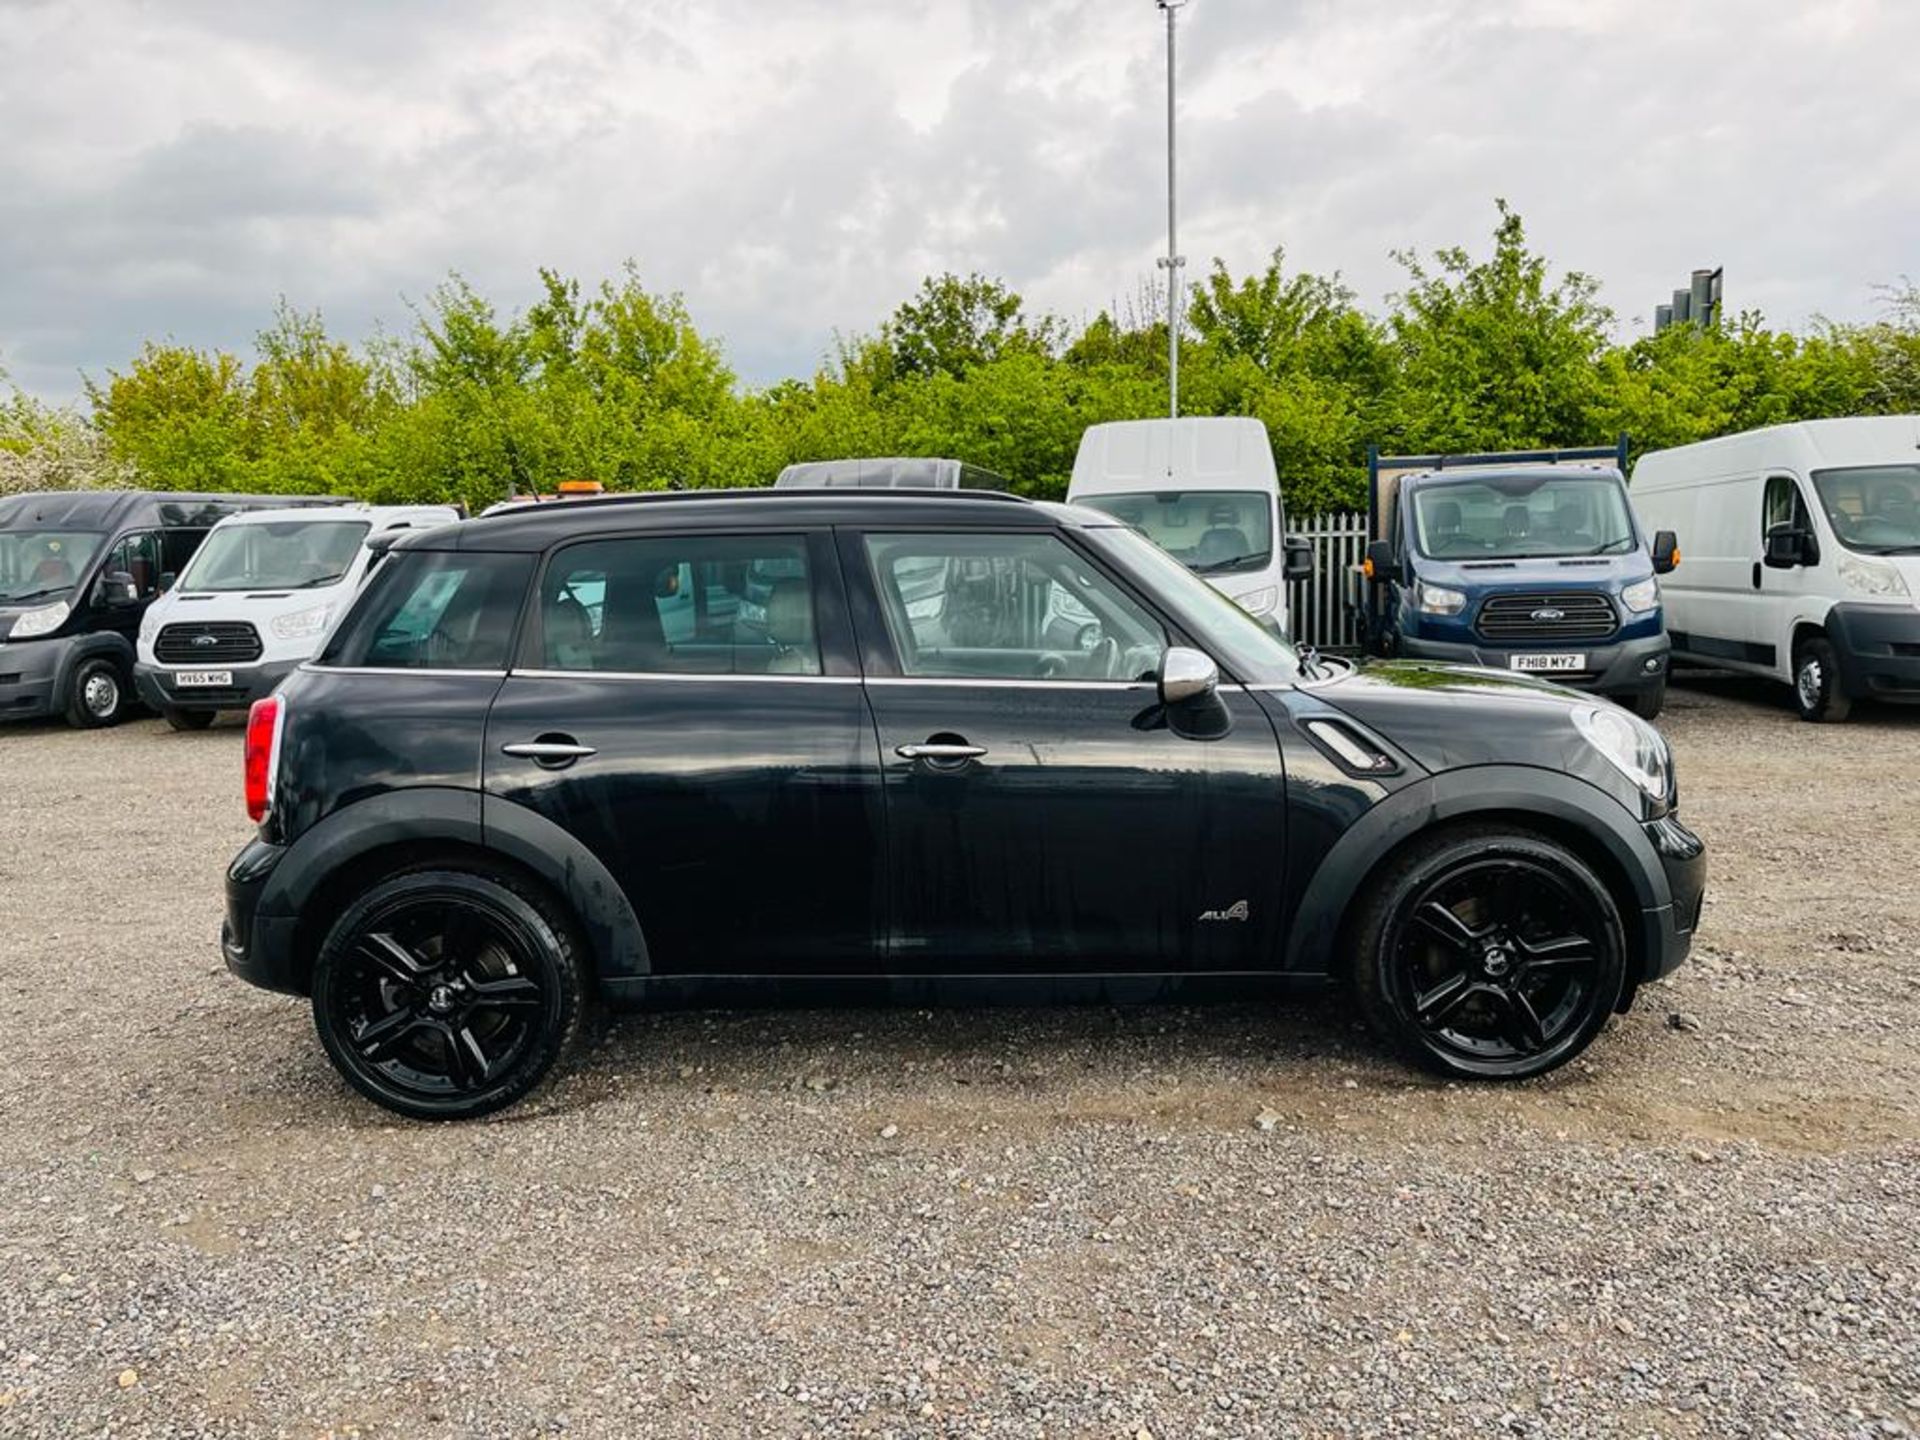 **ON SALE** Mini Cooper Countryman All4 SD 2.0 2011 "61 Reg" - Start/Stop - Alloy Wheels -Navigation - Image 9 of 25